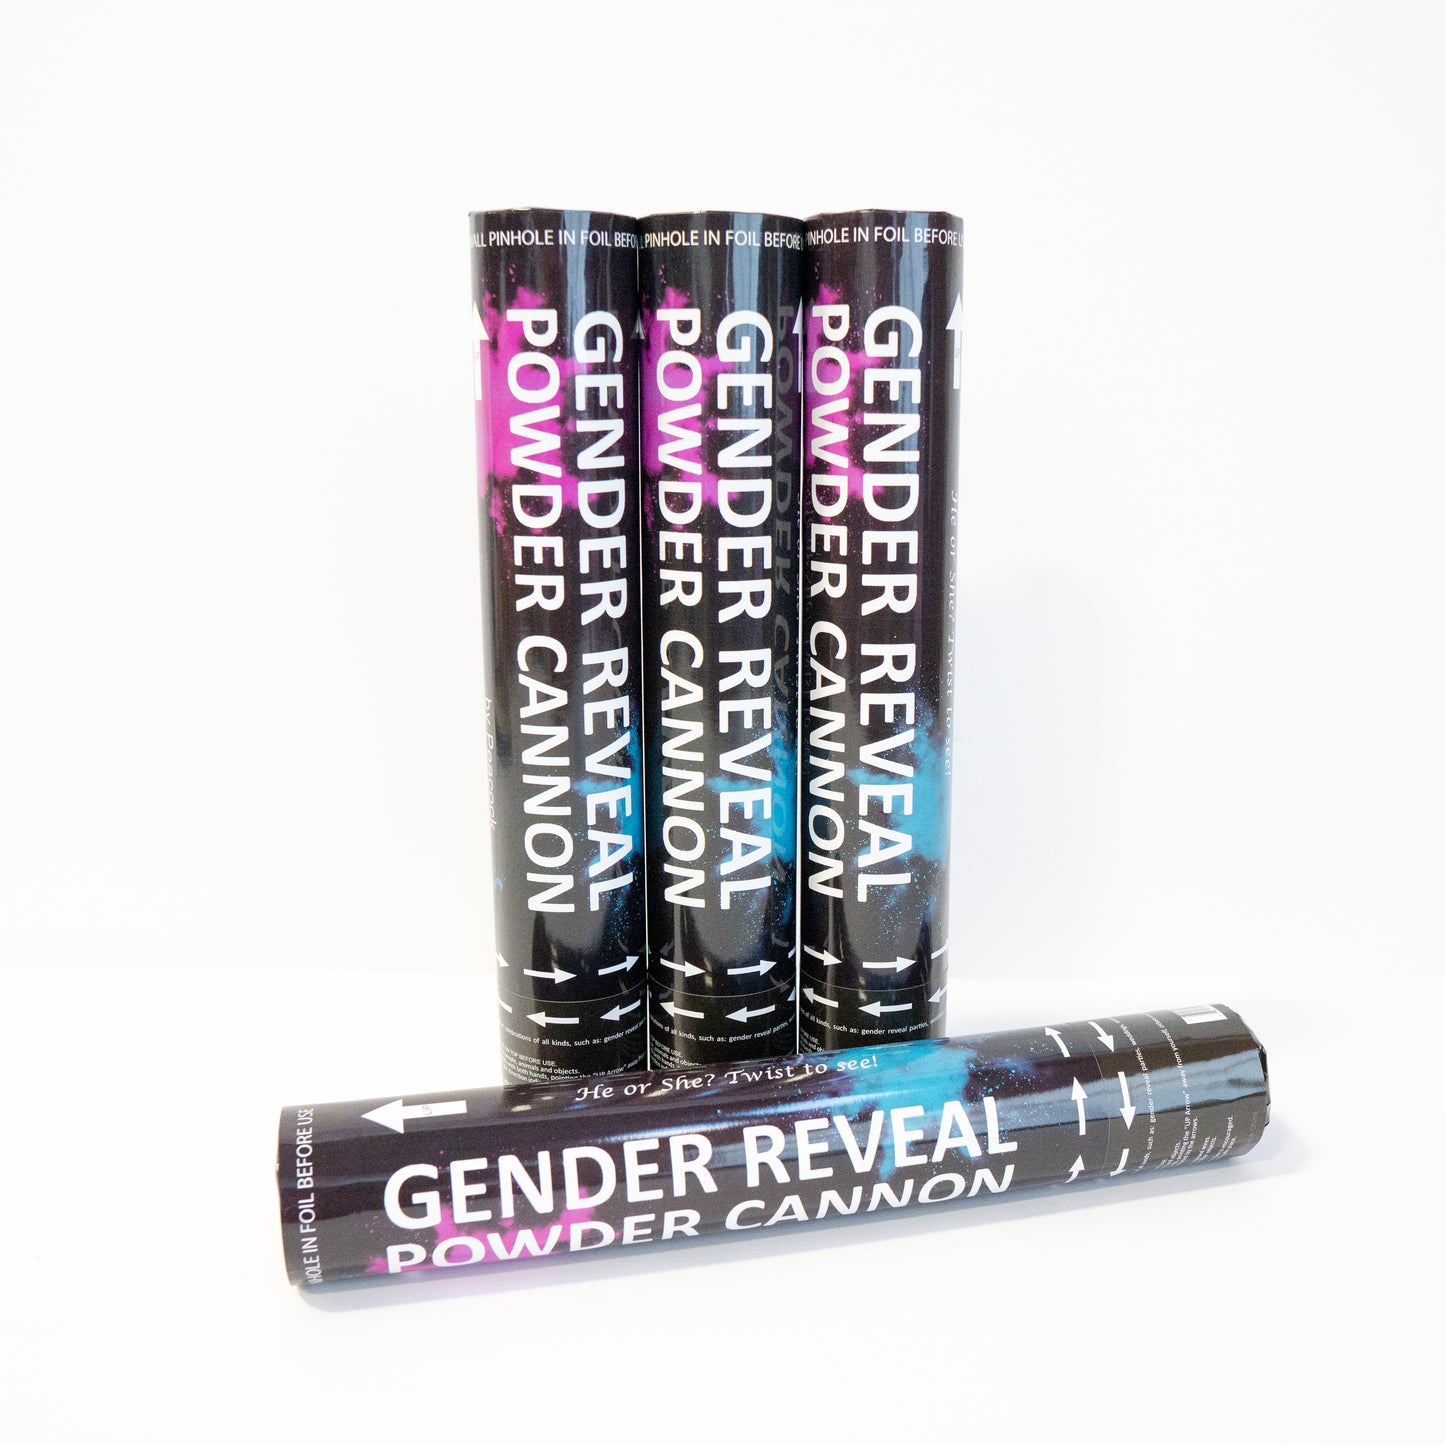 12" Gender Reveal Powder Cannon